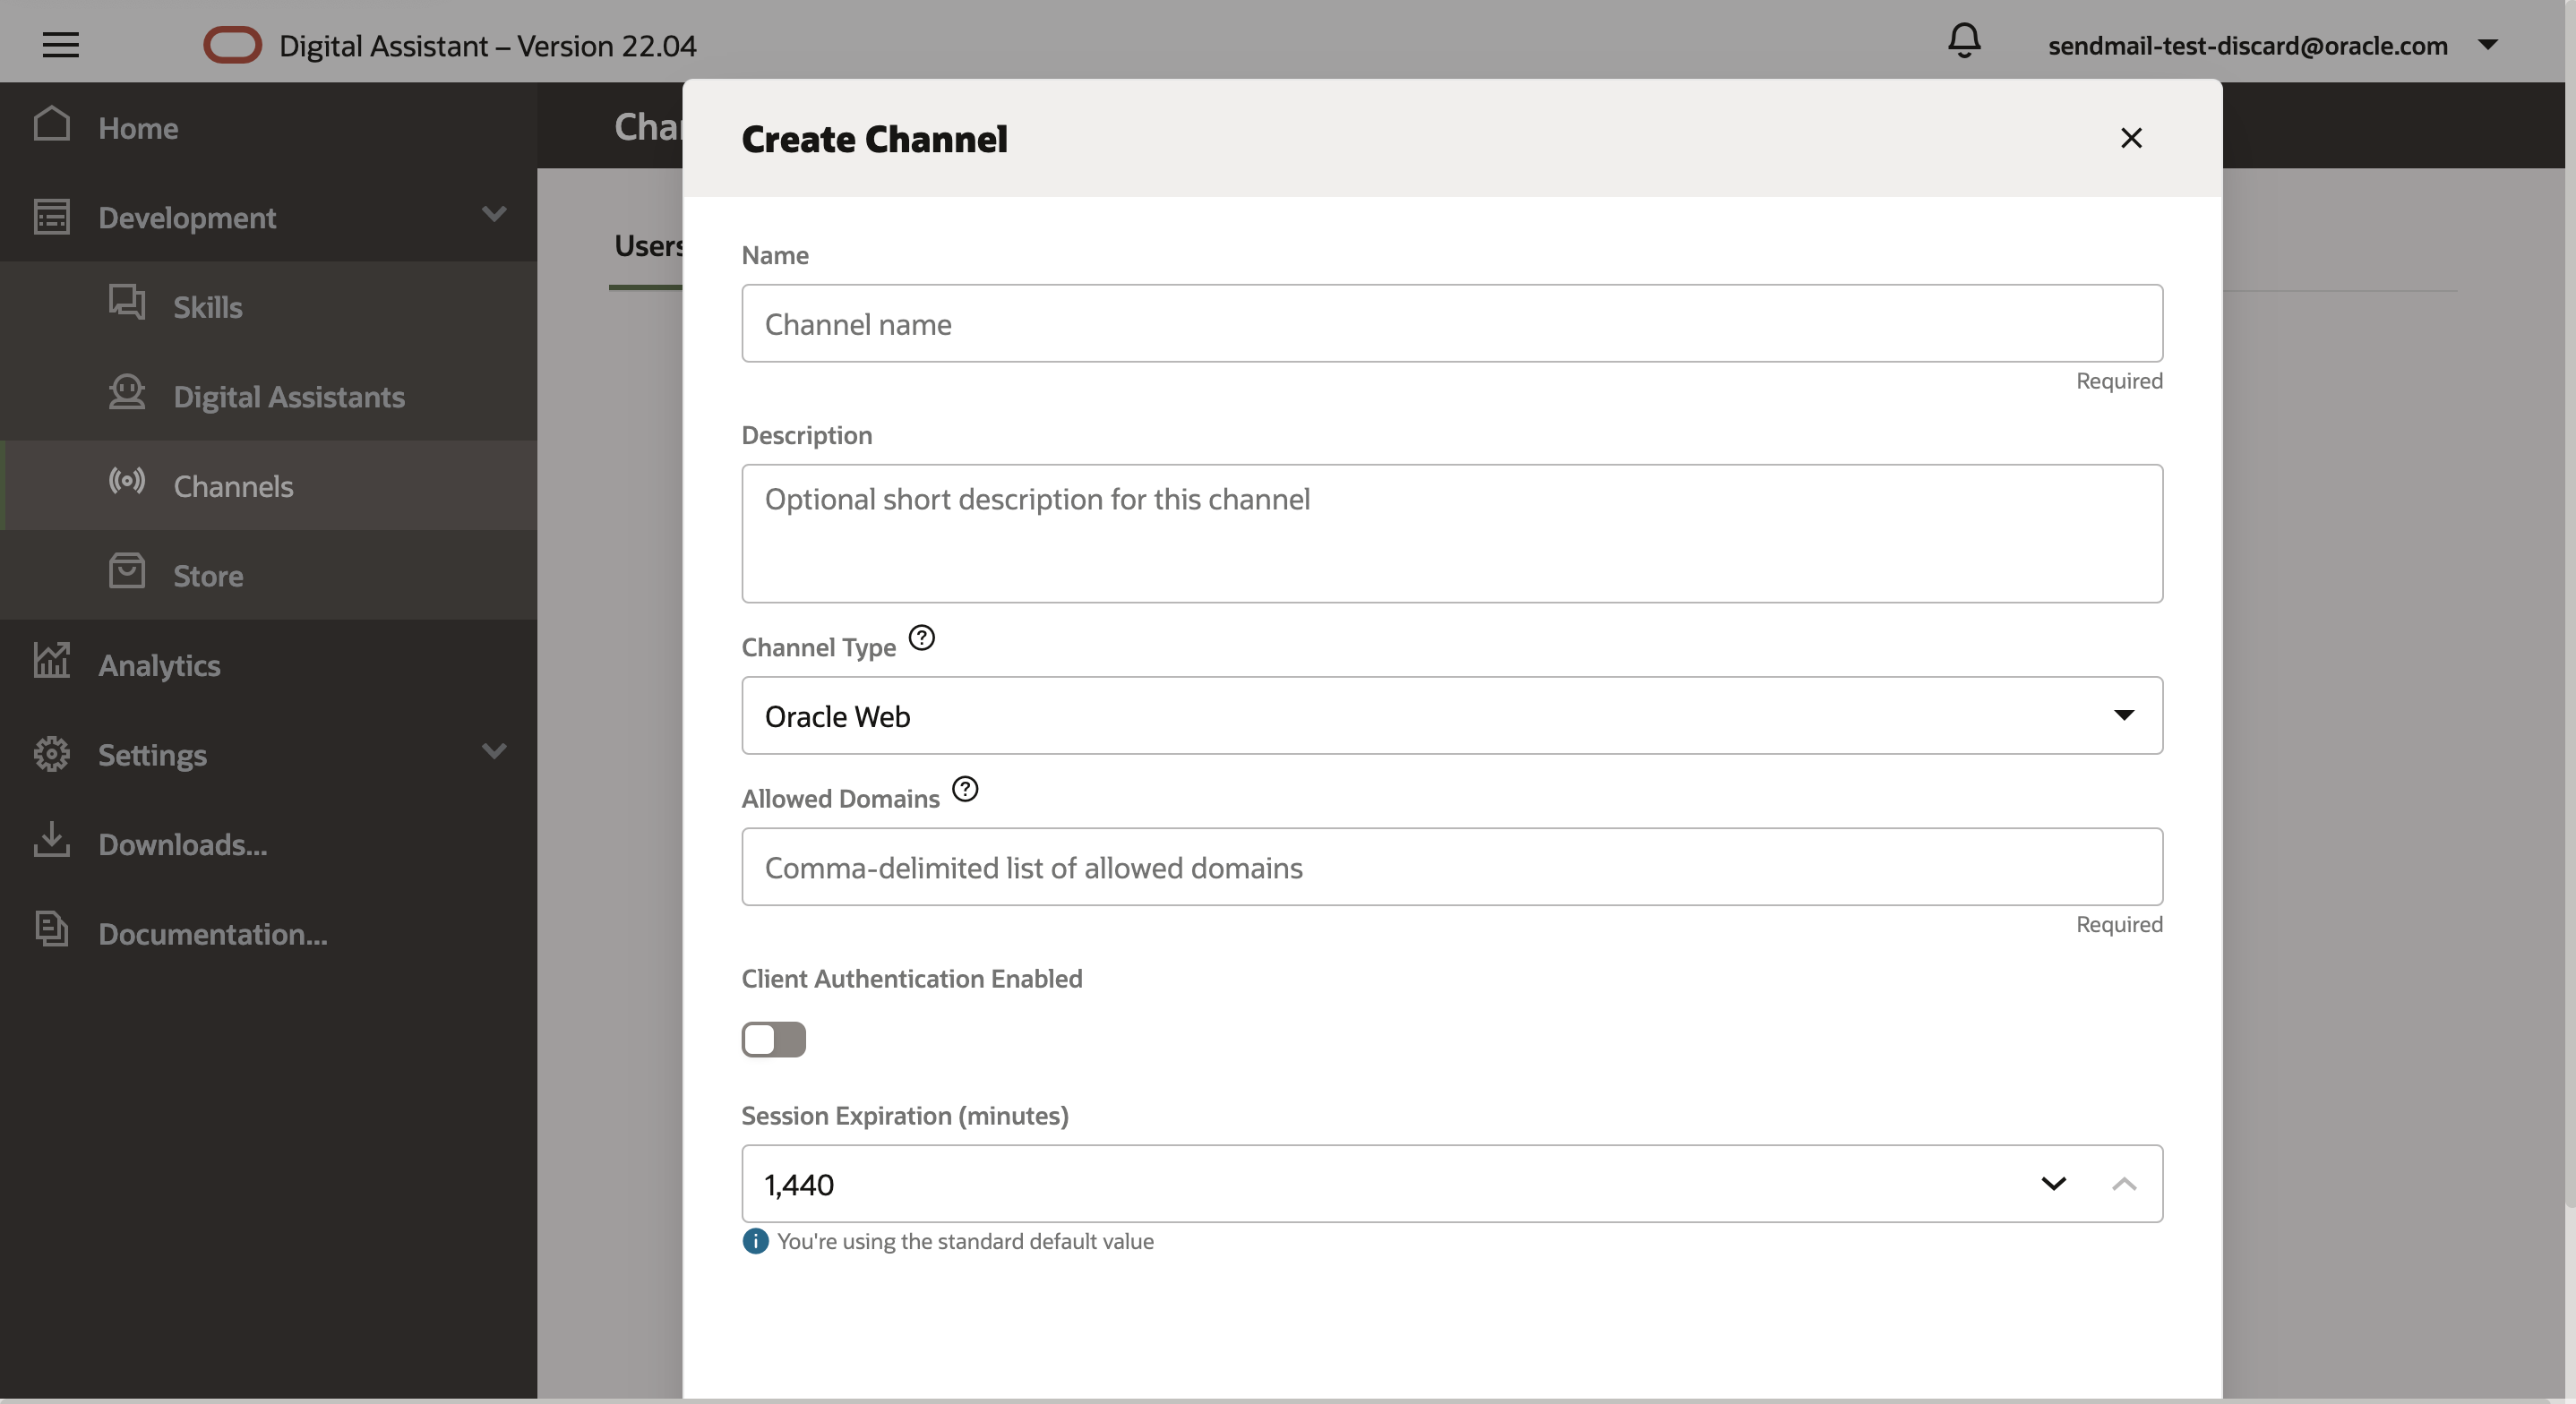 This screenshot shows the Create Channel page in the Oracle Digital Assistant.